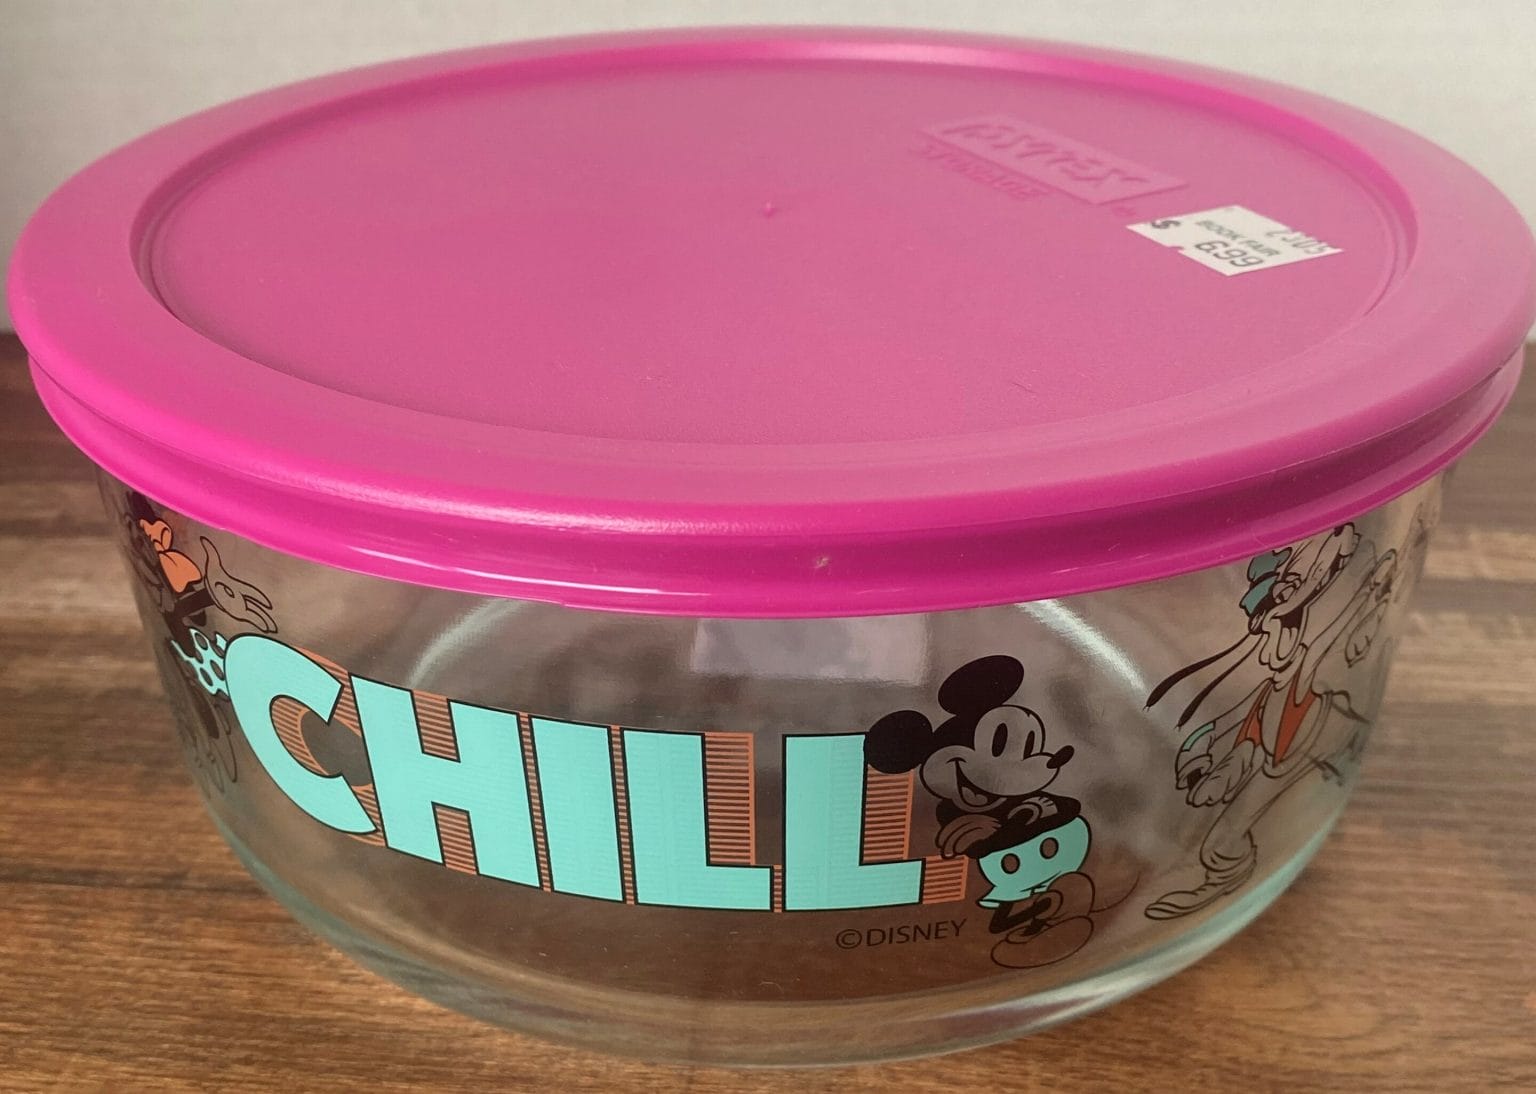 https://cdn.gobookfair.com/app/uploads/2023/05/24161503/Pyrex-7-Cup-Mickey-Mouse-Chill-Storage-scaled.jpg?strip=all&lossy=1&fit=1536%2C1094&ssl=1